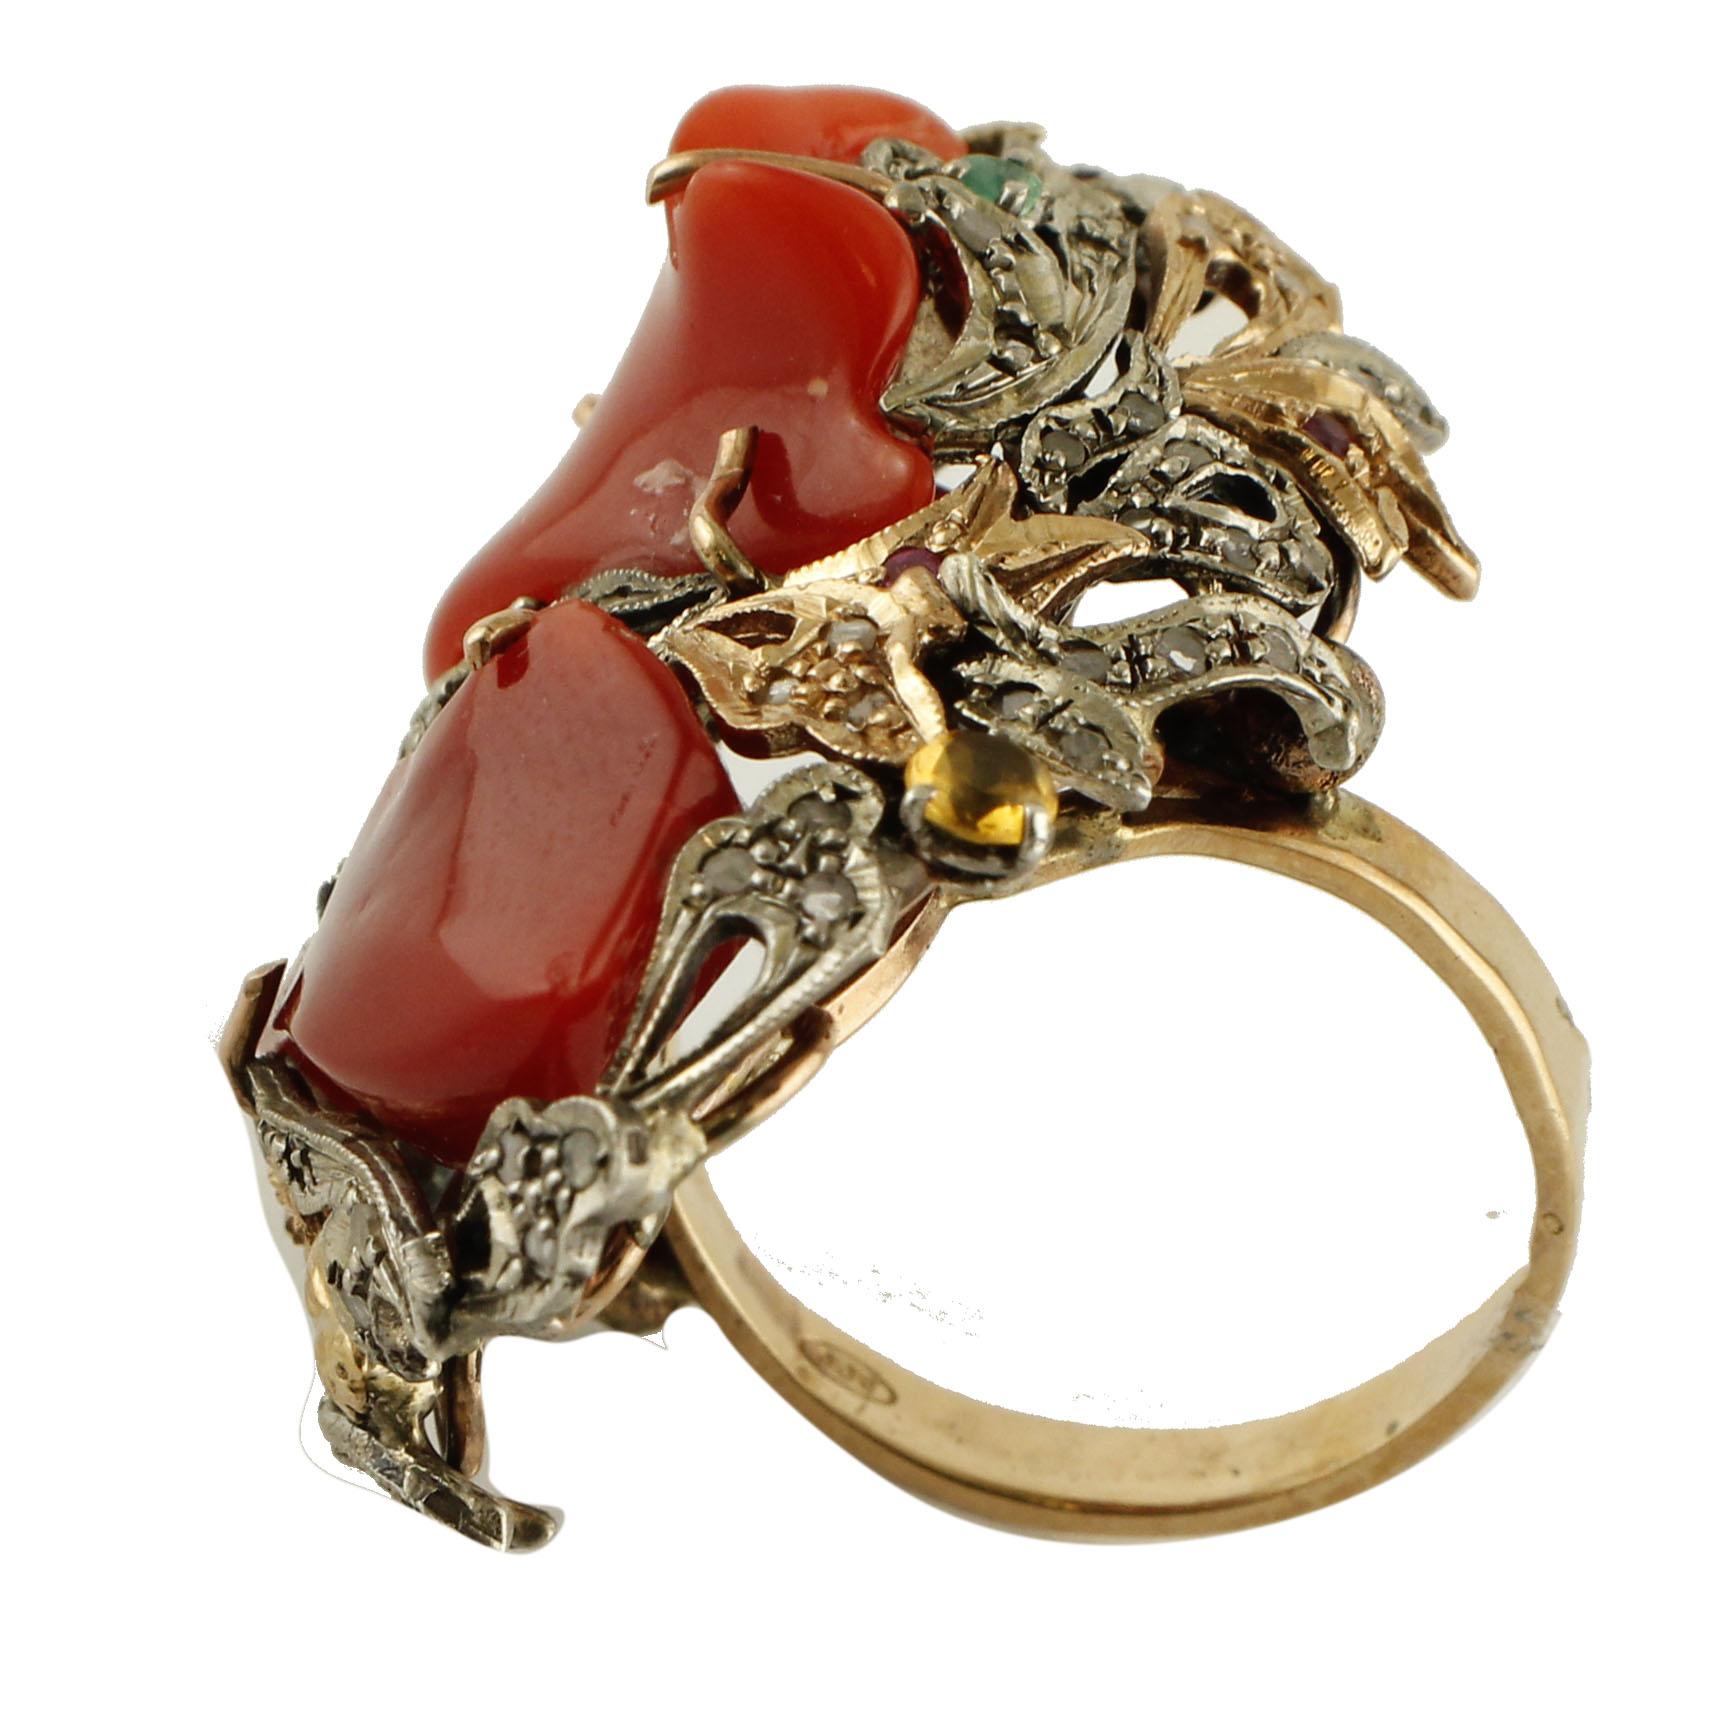 Women's Corals, Diamonds, Rubies, Emeralds, Gold and Silver Retro Cocktail Ring